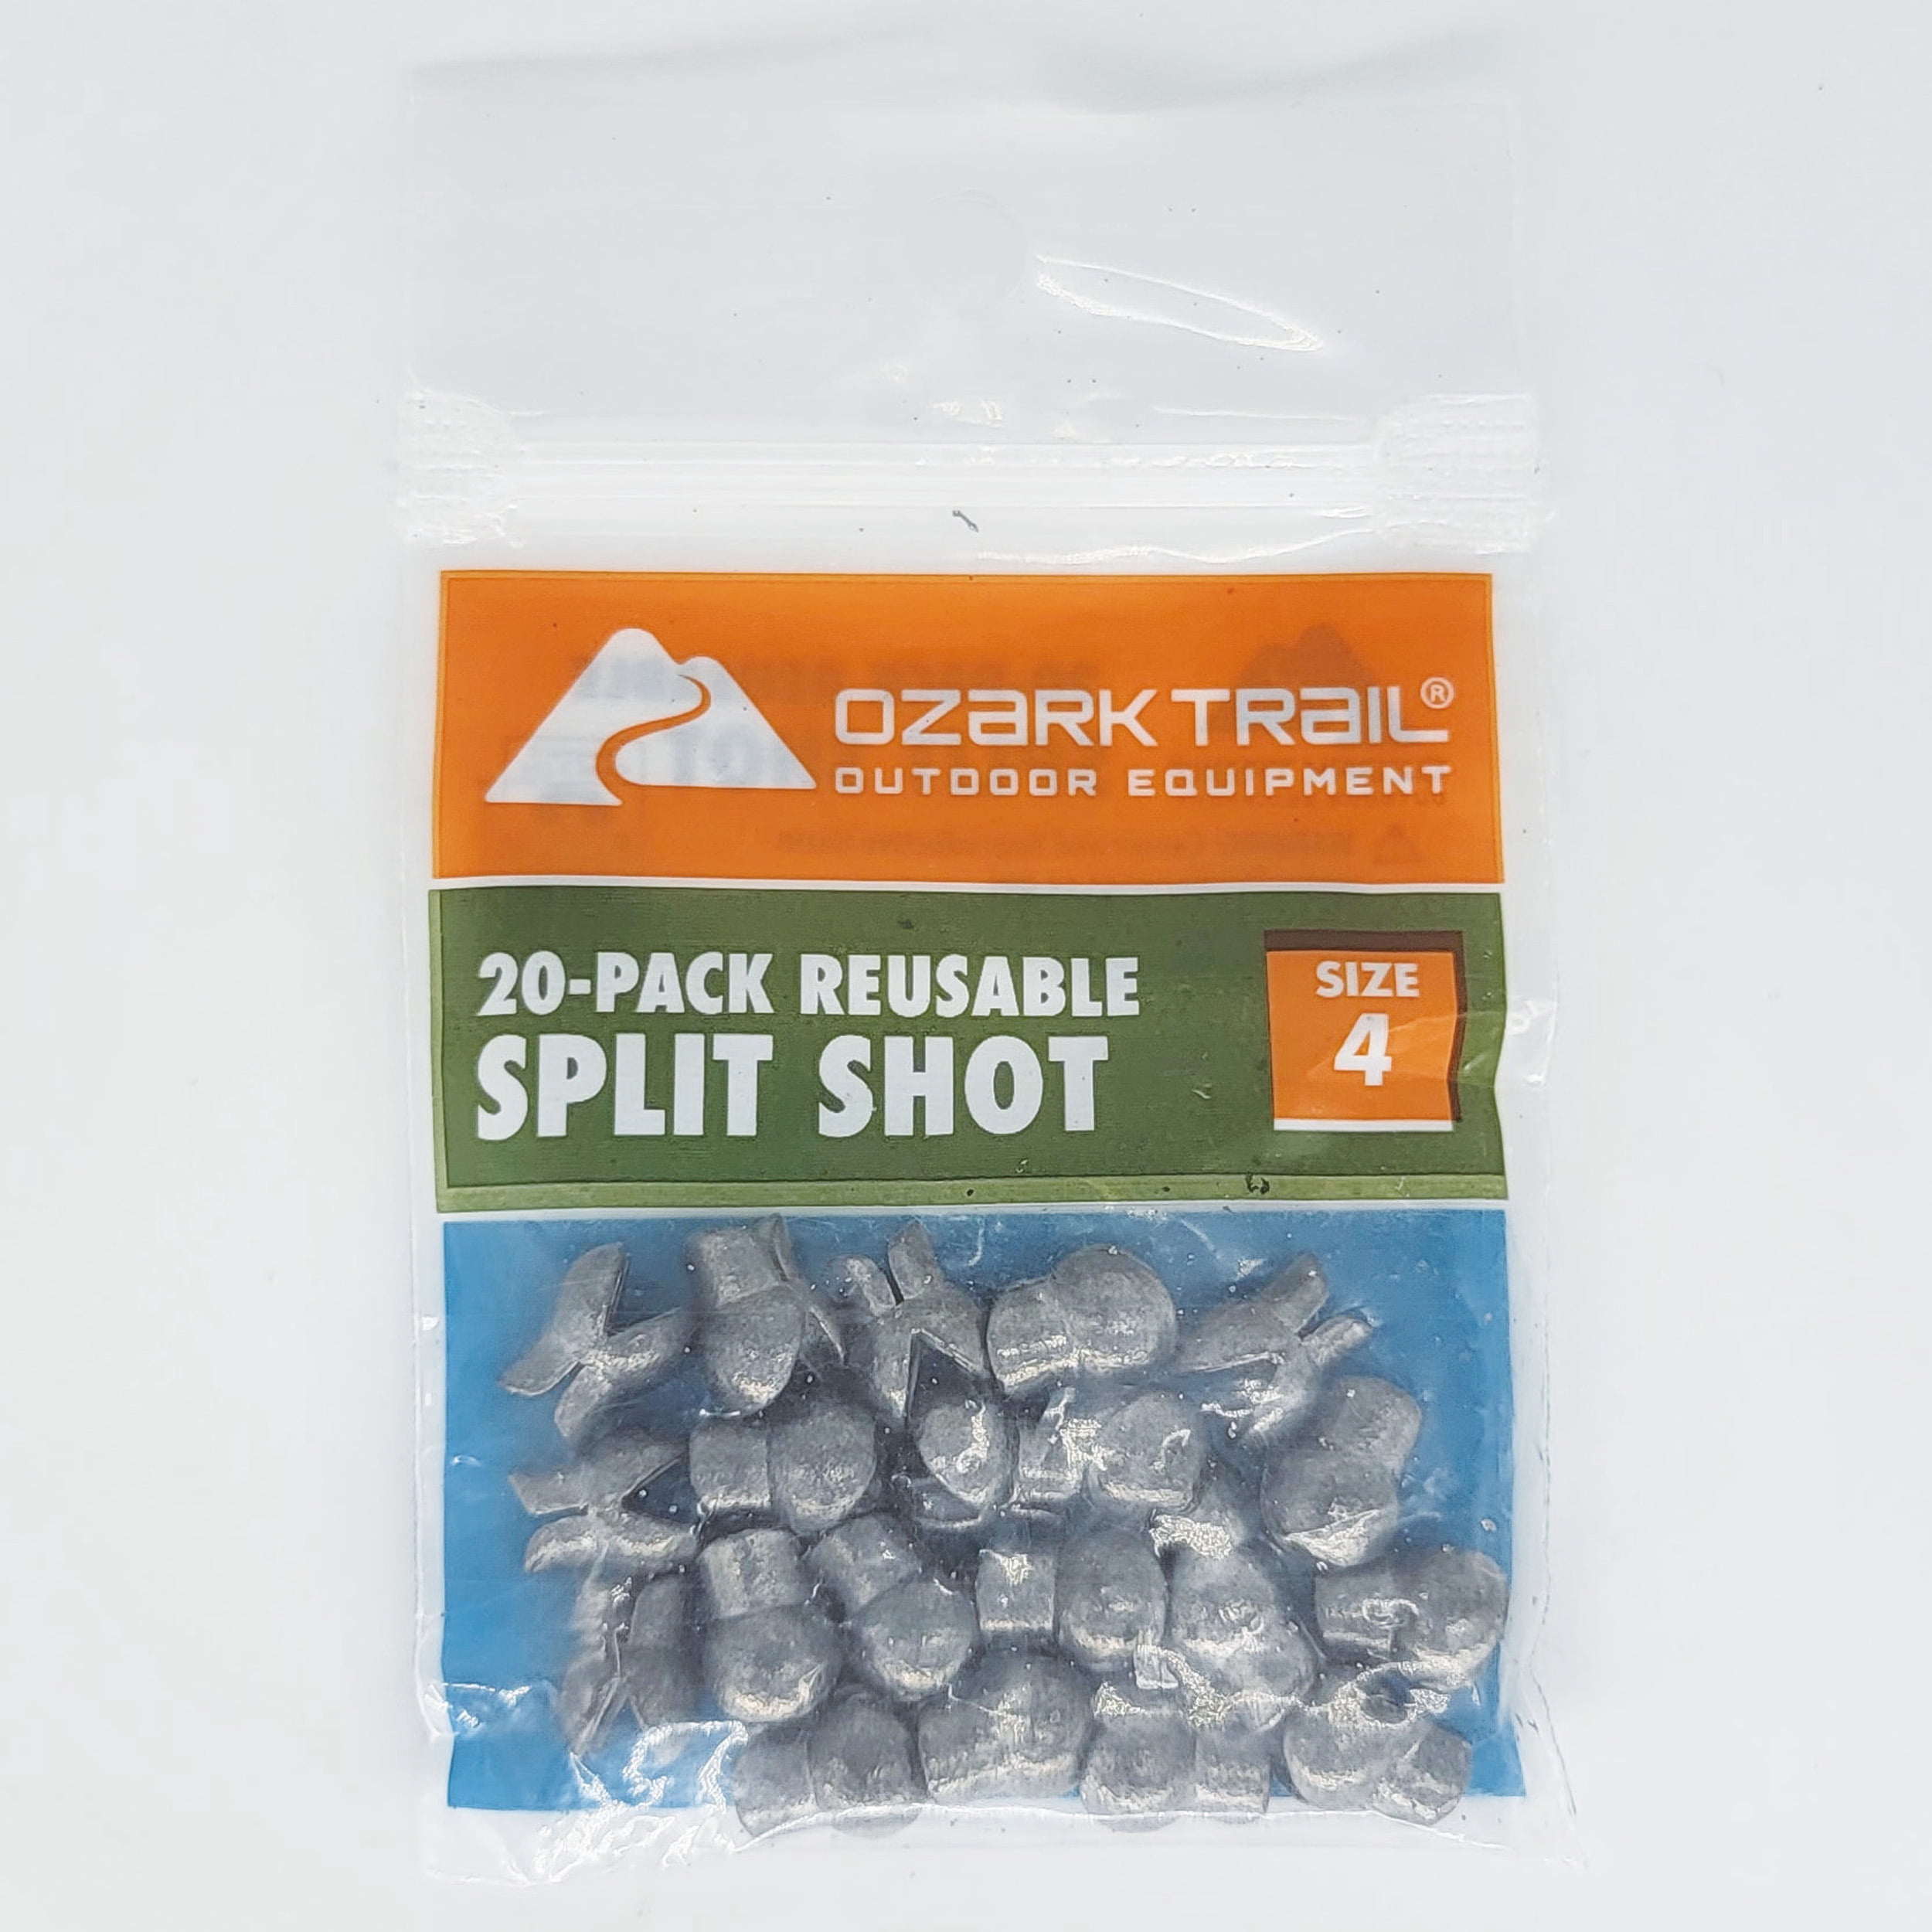 Ozark Trail Reusable Shot #4, Fishing Lead Weights, Product Size